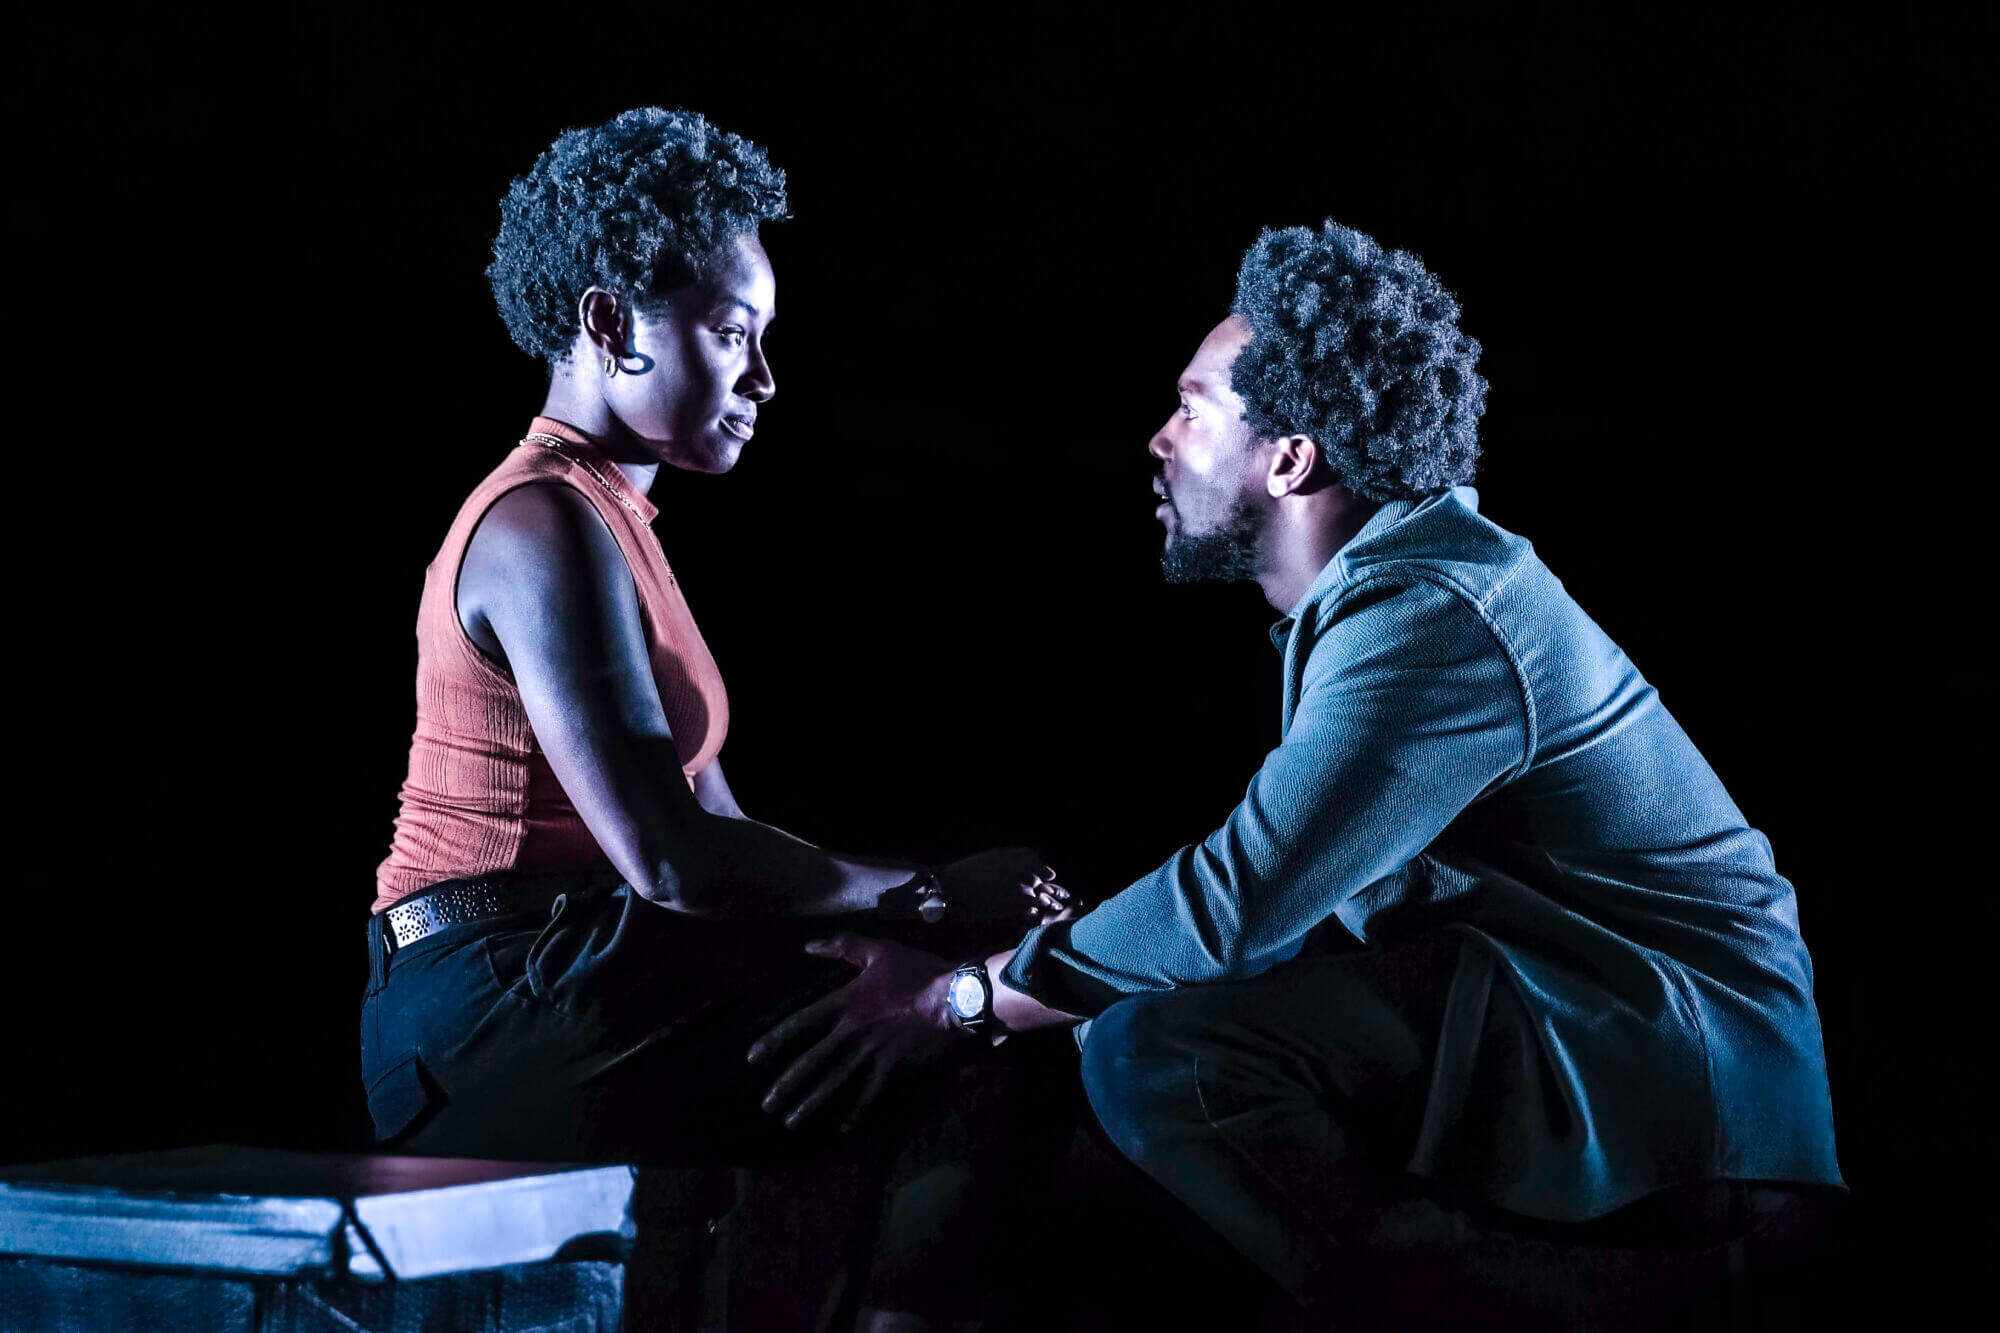 Pictured left to right are Heather Agyepong (Des) and Tosin Cole (Dre) in 'Shifters' at Bush Theatre